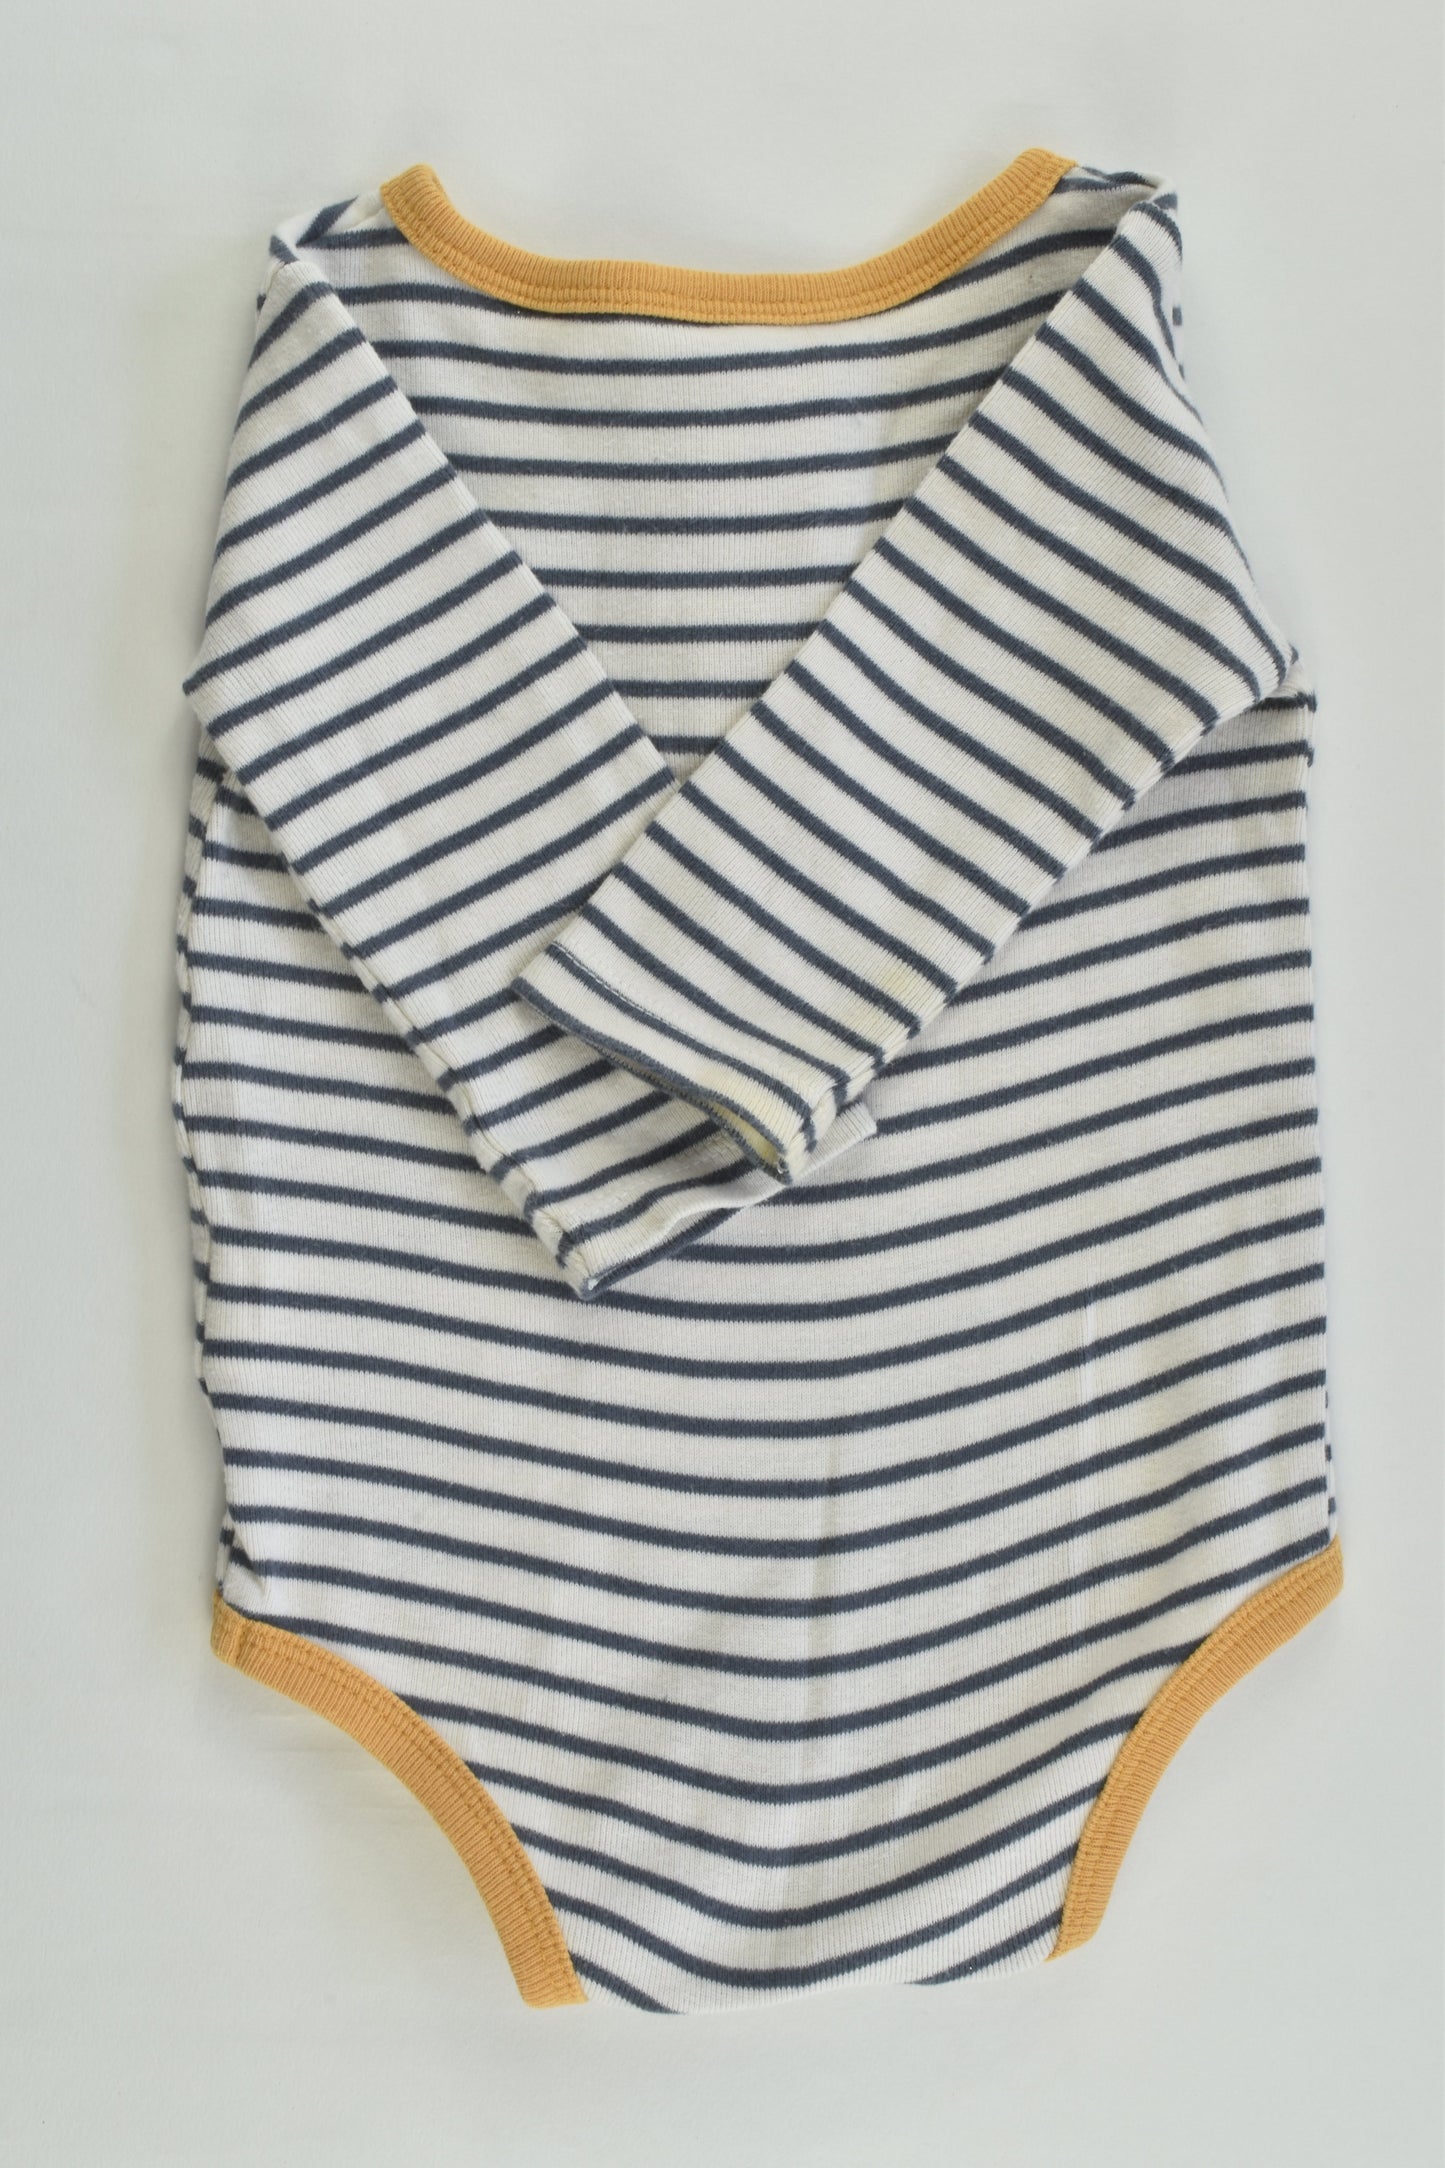 Cotton On Baby Size 00 (3-6 months) Striped Bodysuit